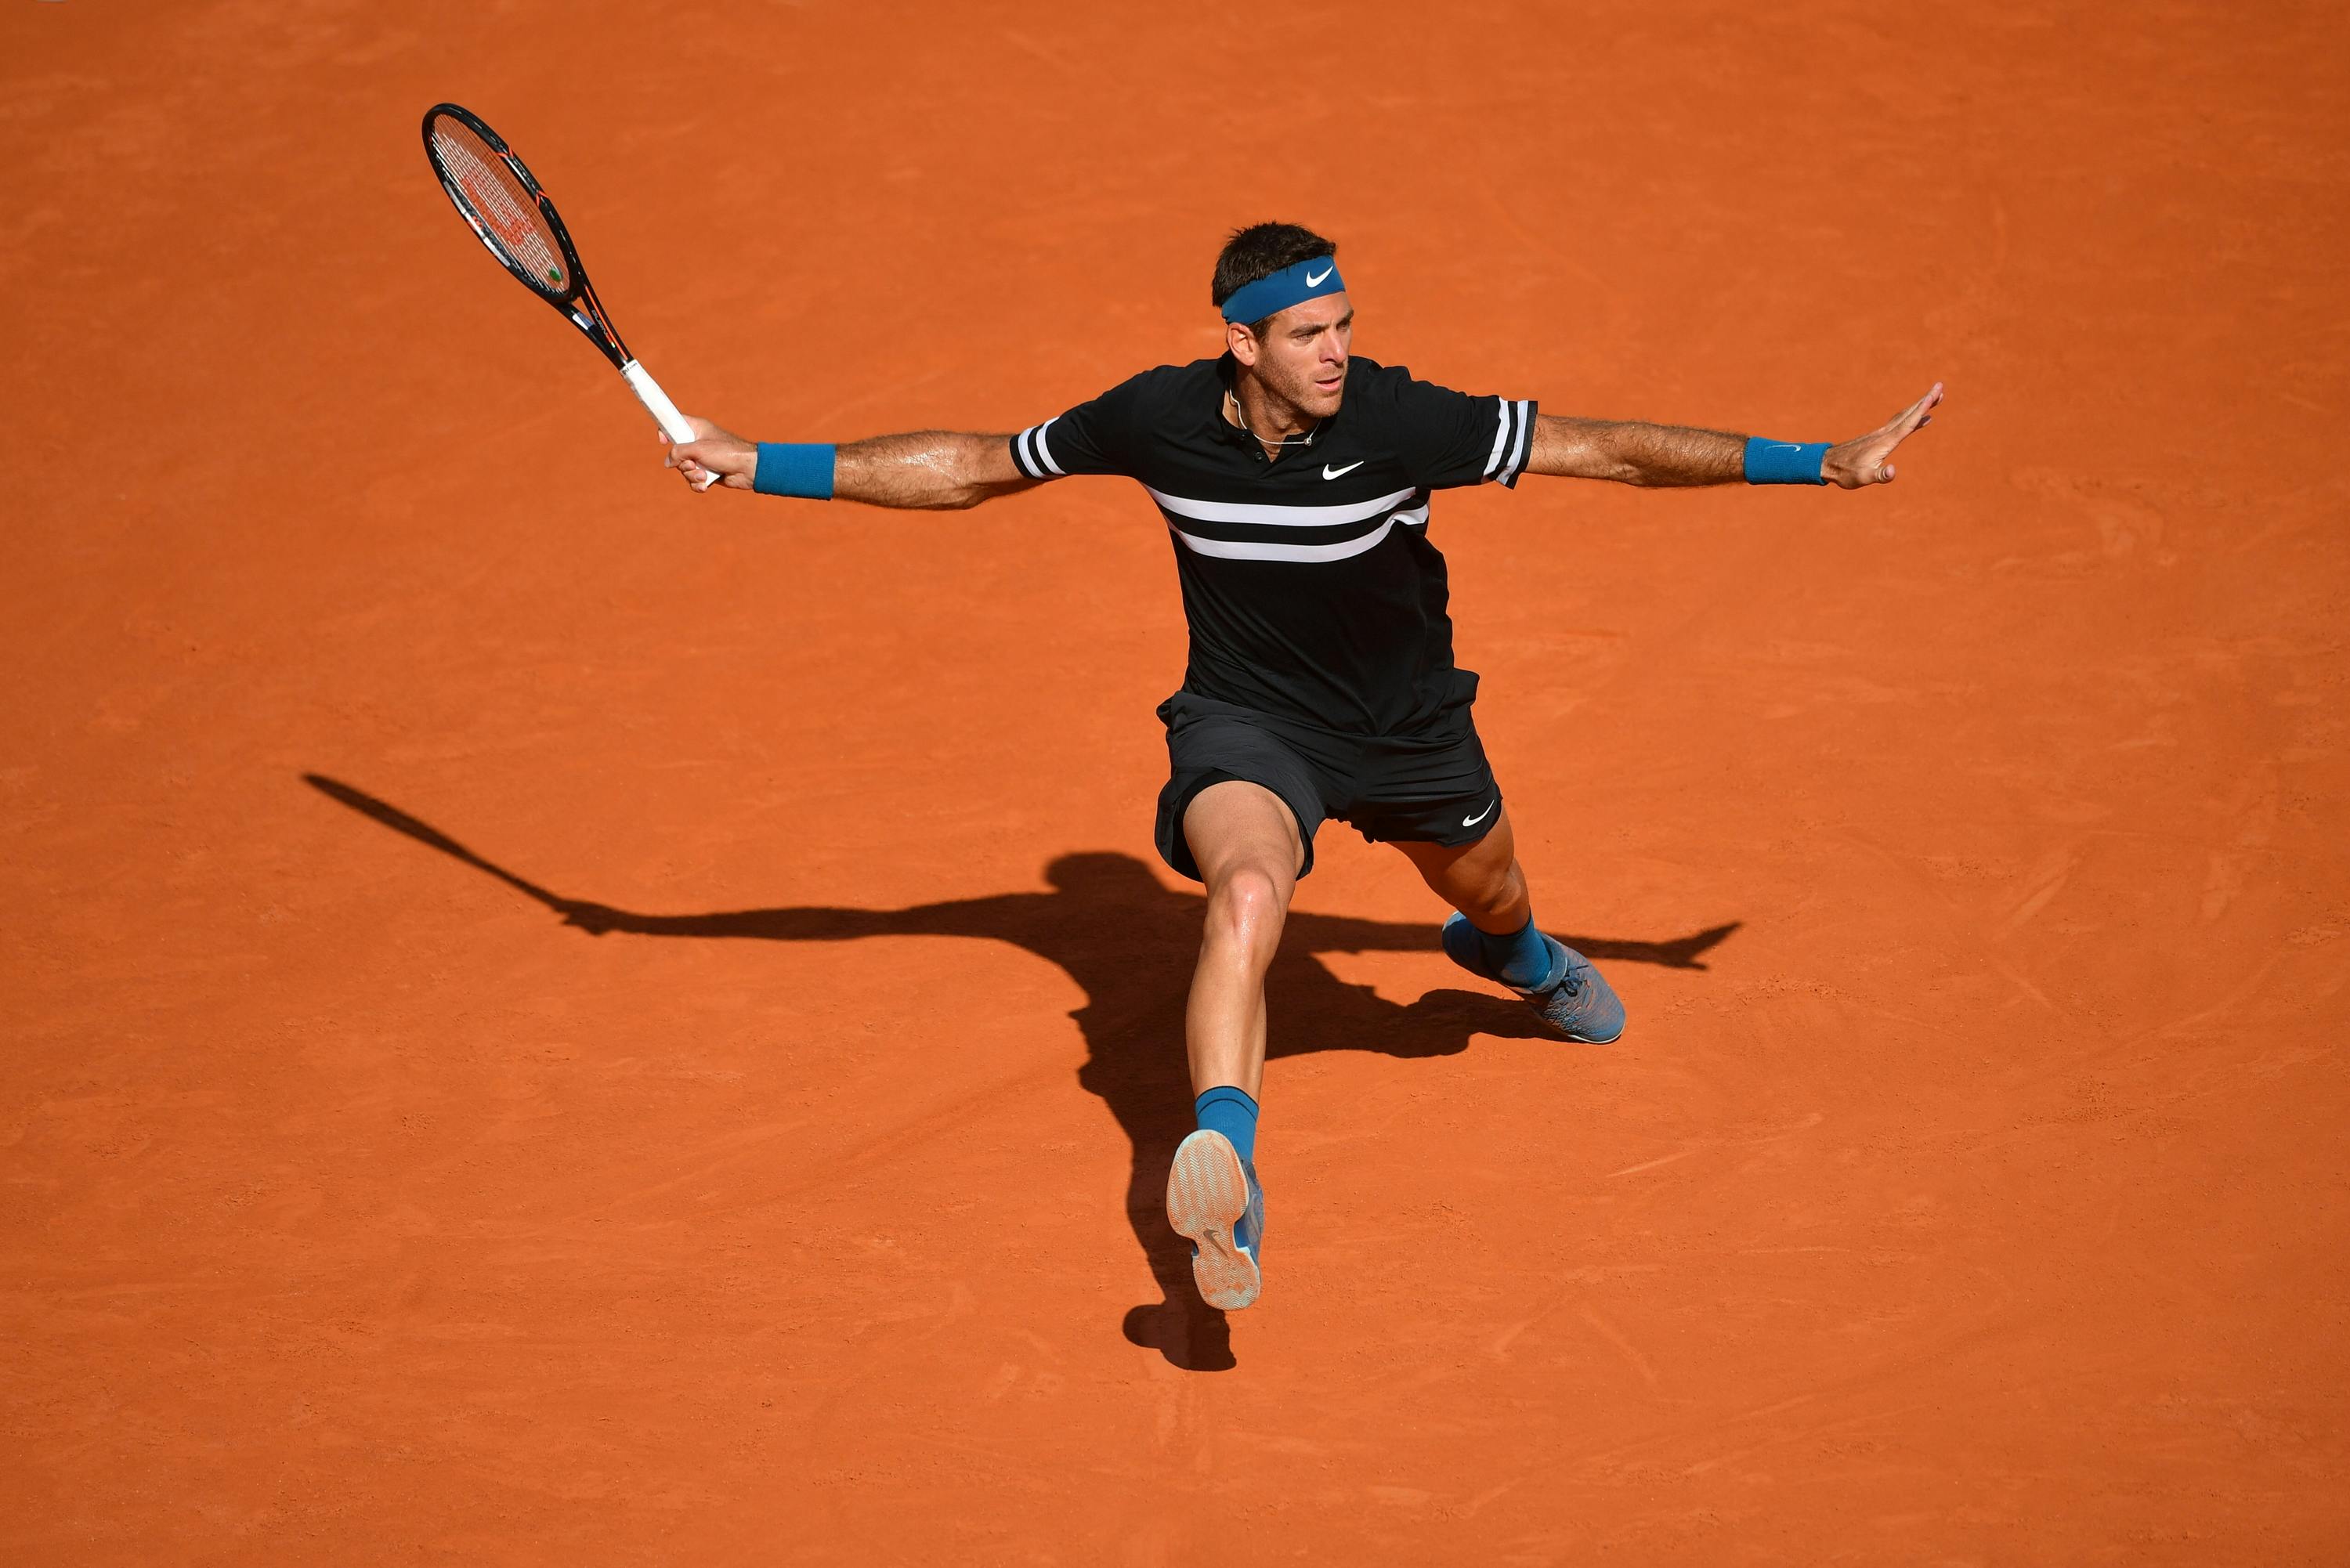 Juan Martin del Potro about to hit a forehand at Roland-Garros 2018